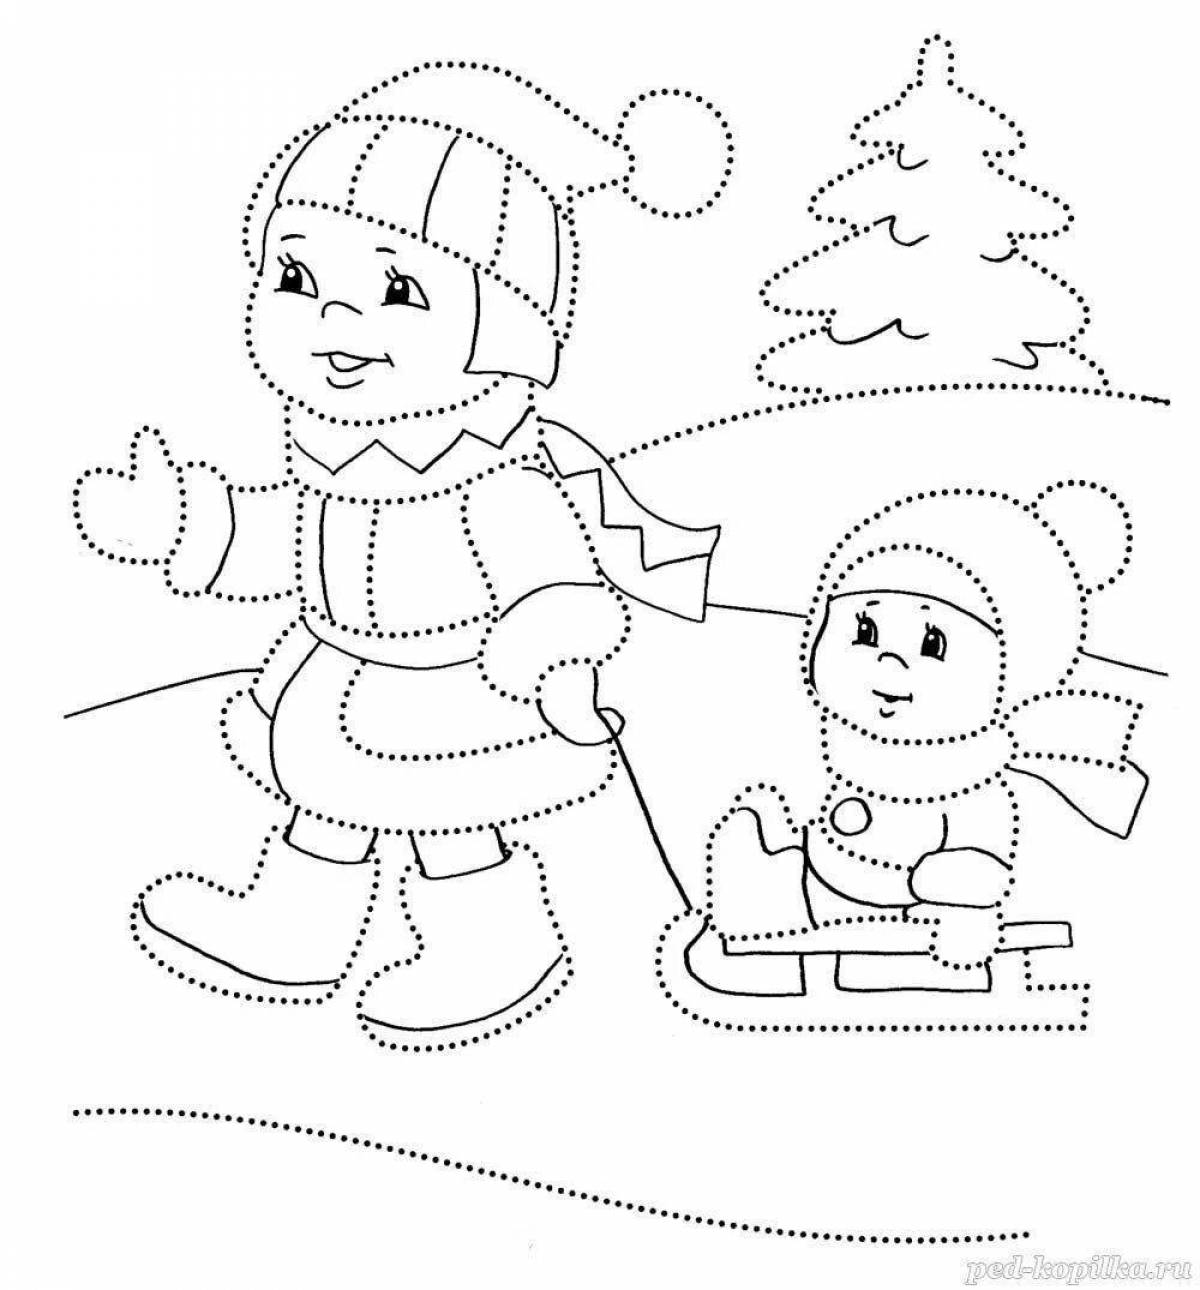 Adorable winter activities for 3-4 year olds